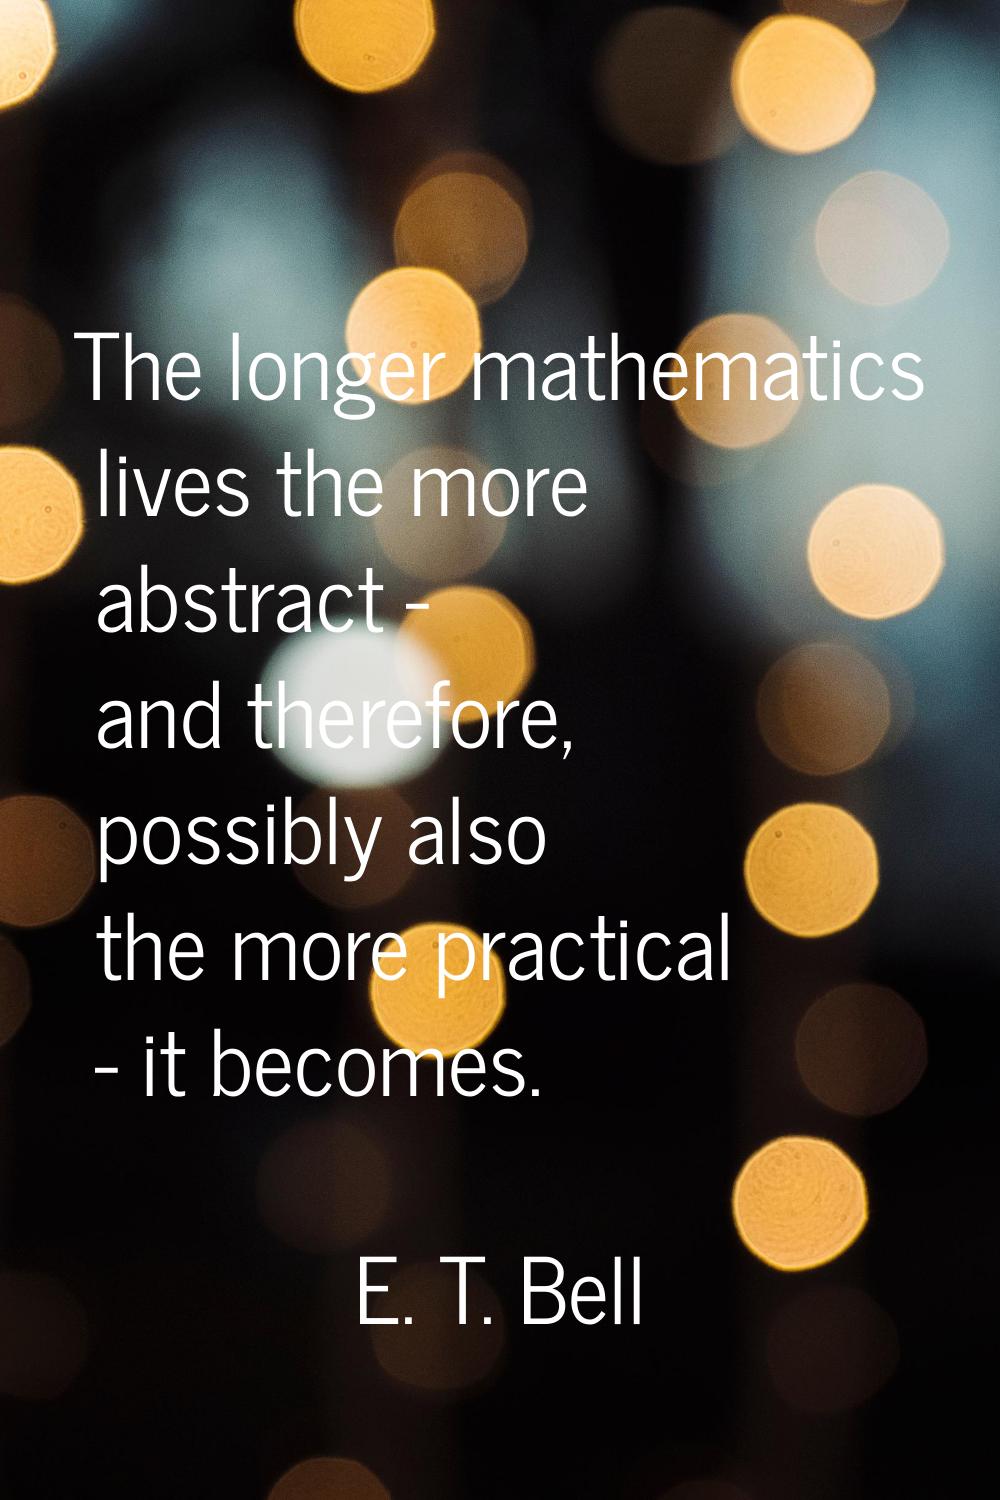 The longer mathematics lives the more abstract - and therefore, possibly also the more practical - 